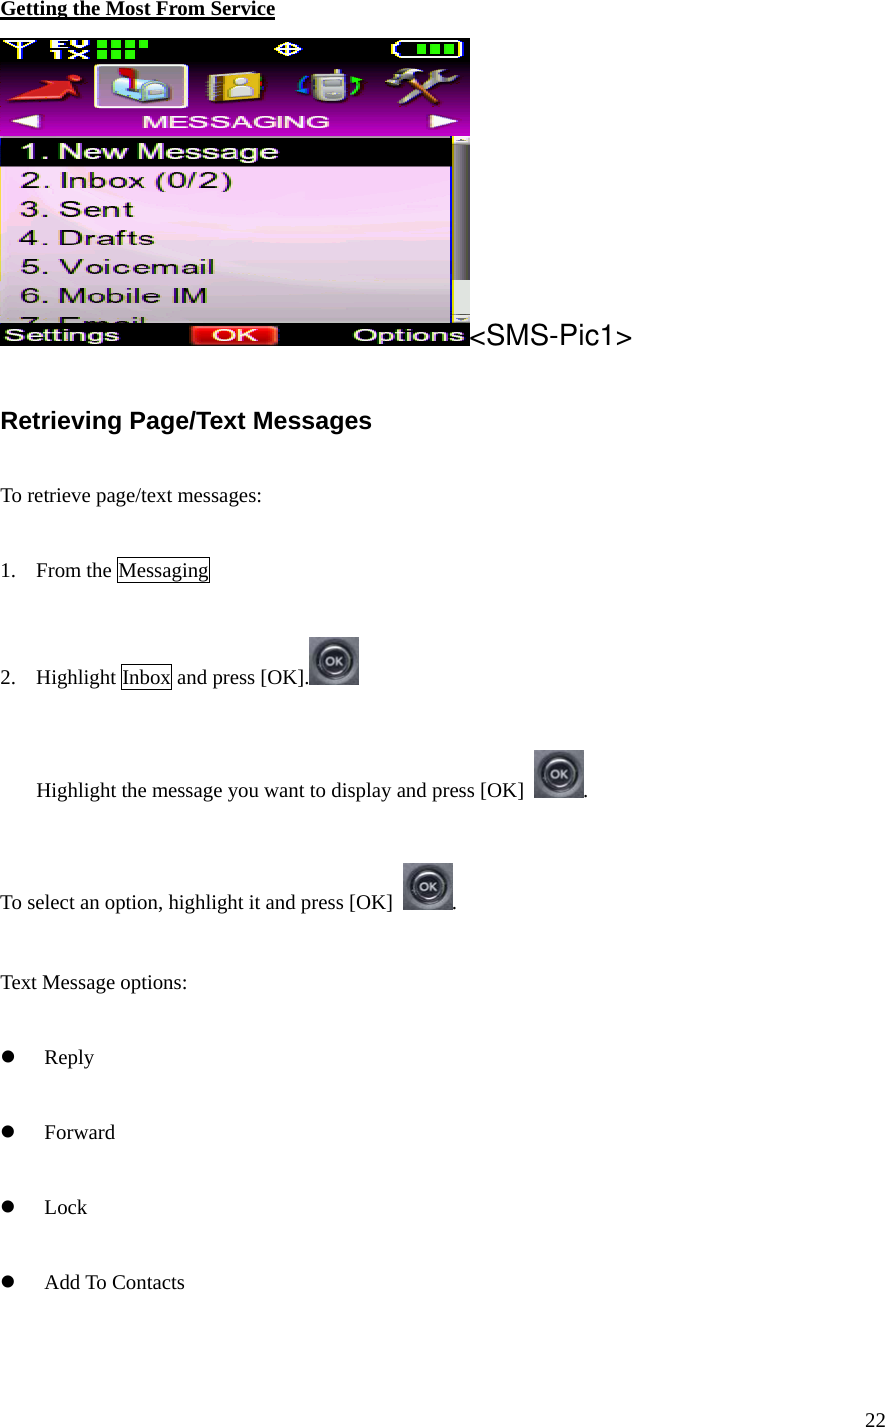 22 Getting the Most From Service &lt;SMS-Pic1&gt;  Retrieving Page/Text Messages  To retrieve page/text messages:  1. From the Messaging    2. Highlight Inbox and press [OK].   Highlight the message you want to display and press [OK]  .   To select an option, highlight it and press [OK]  .  Text Message options:  z Reply  z Forward  z Lock   z Add To Contacts  